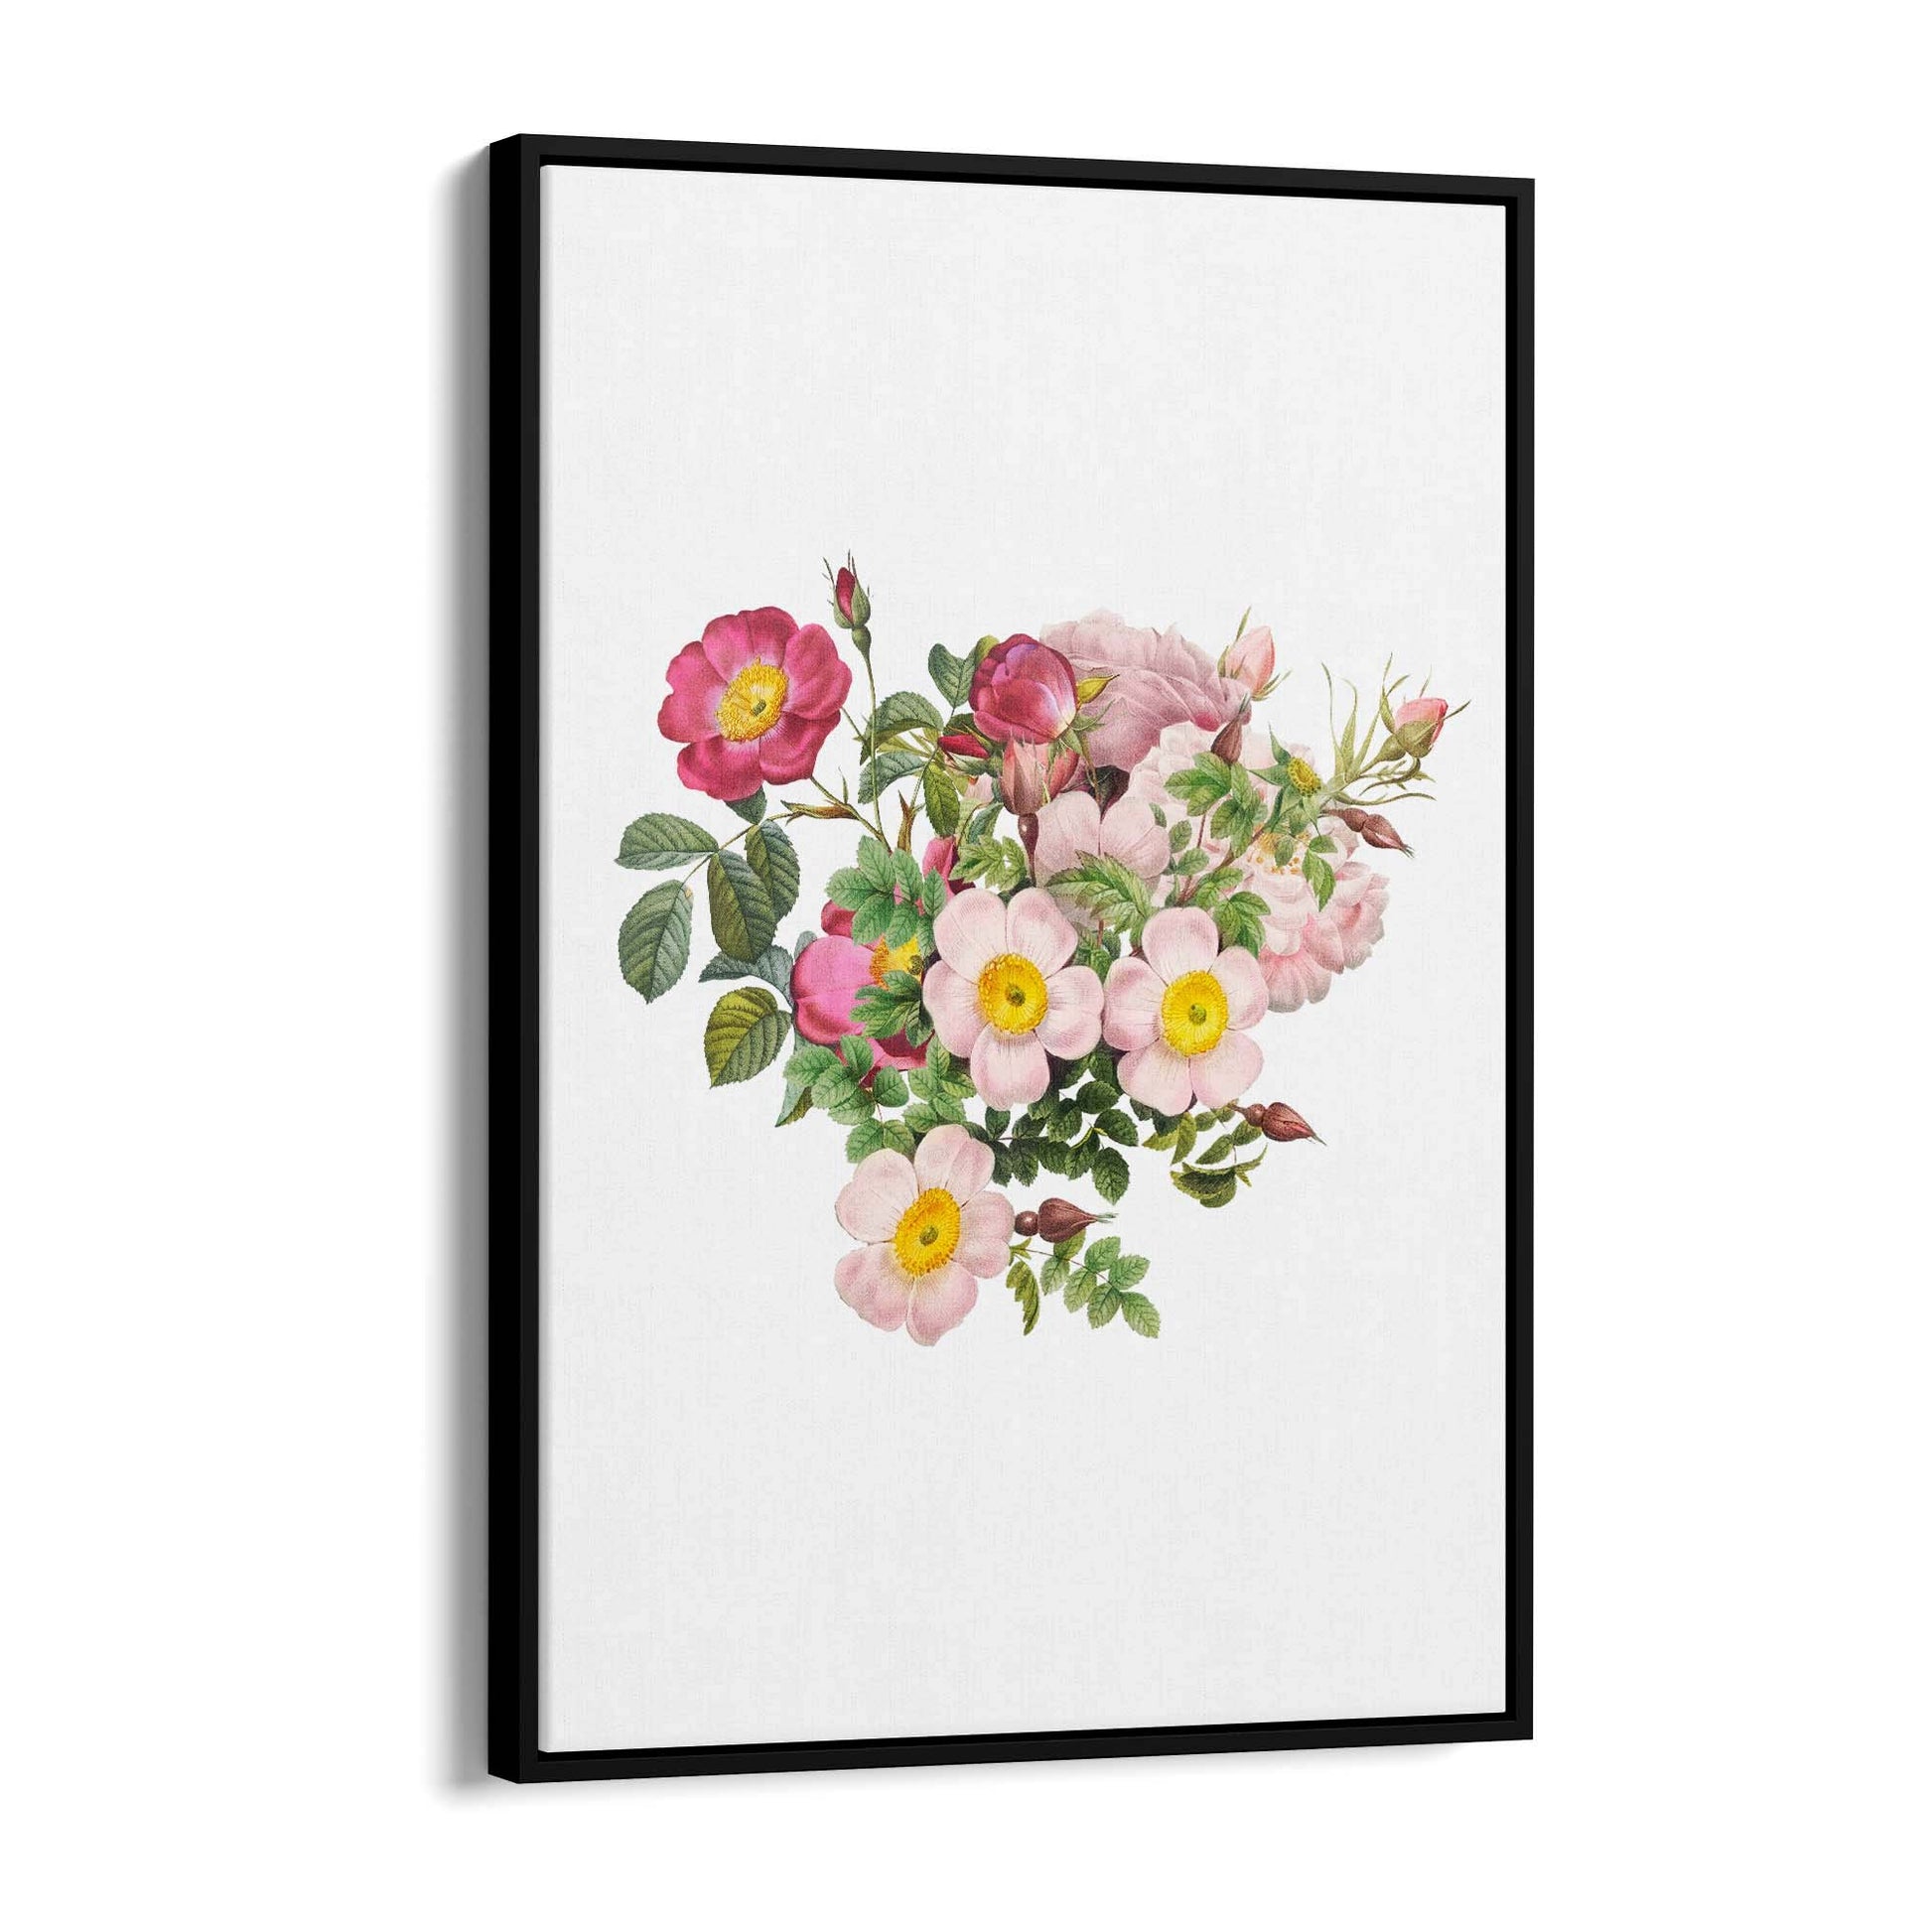 Botanical Flower Painting Floral Kitchen Wall Art #4 - The Affordable Art Company